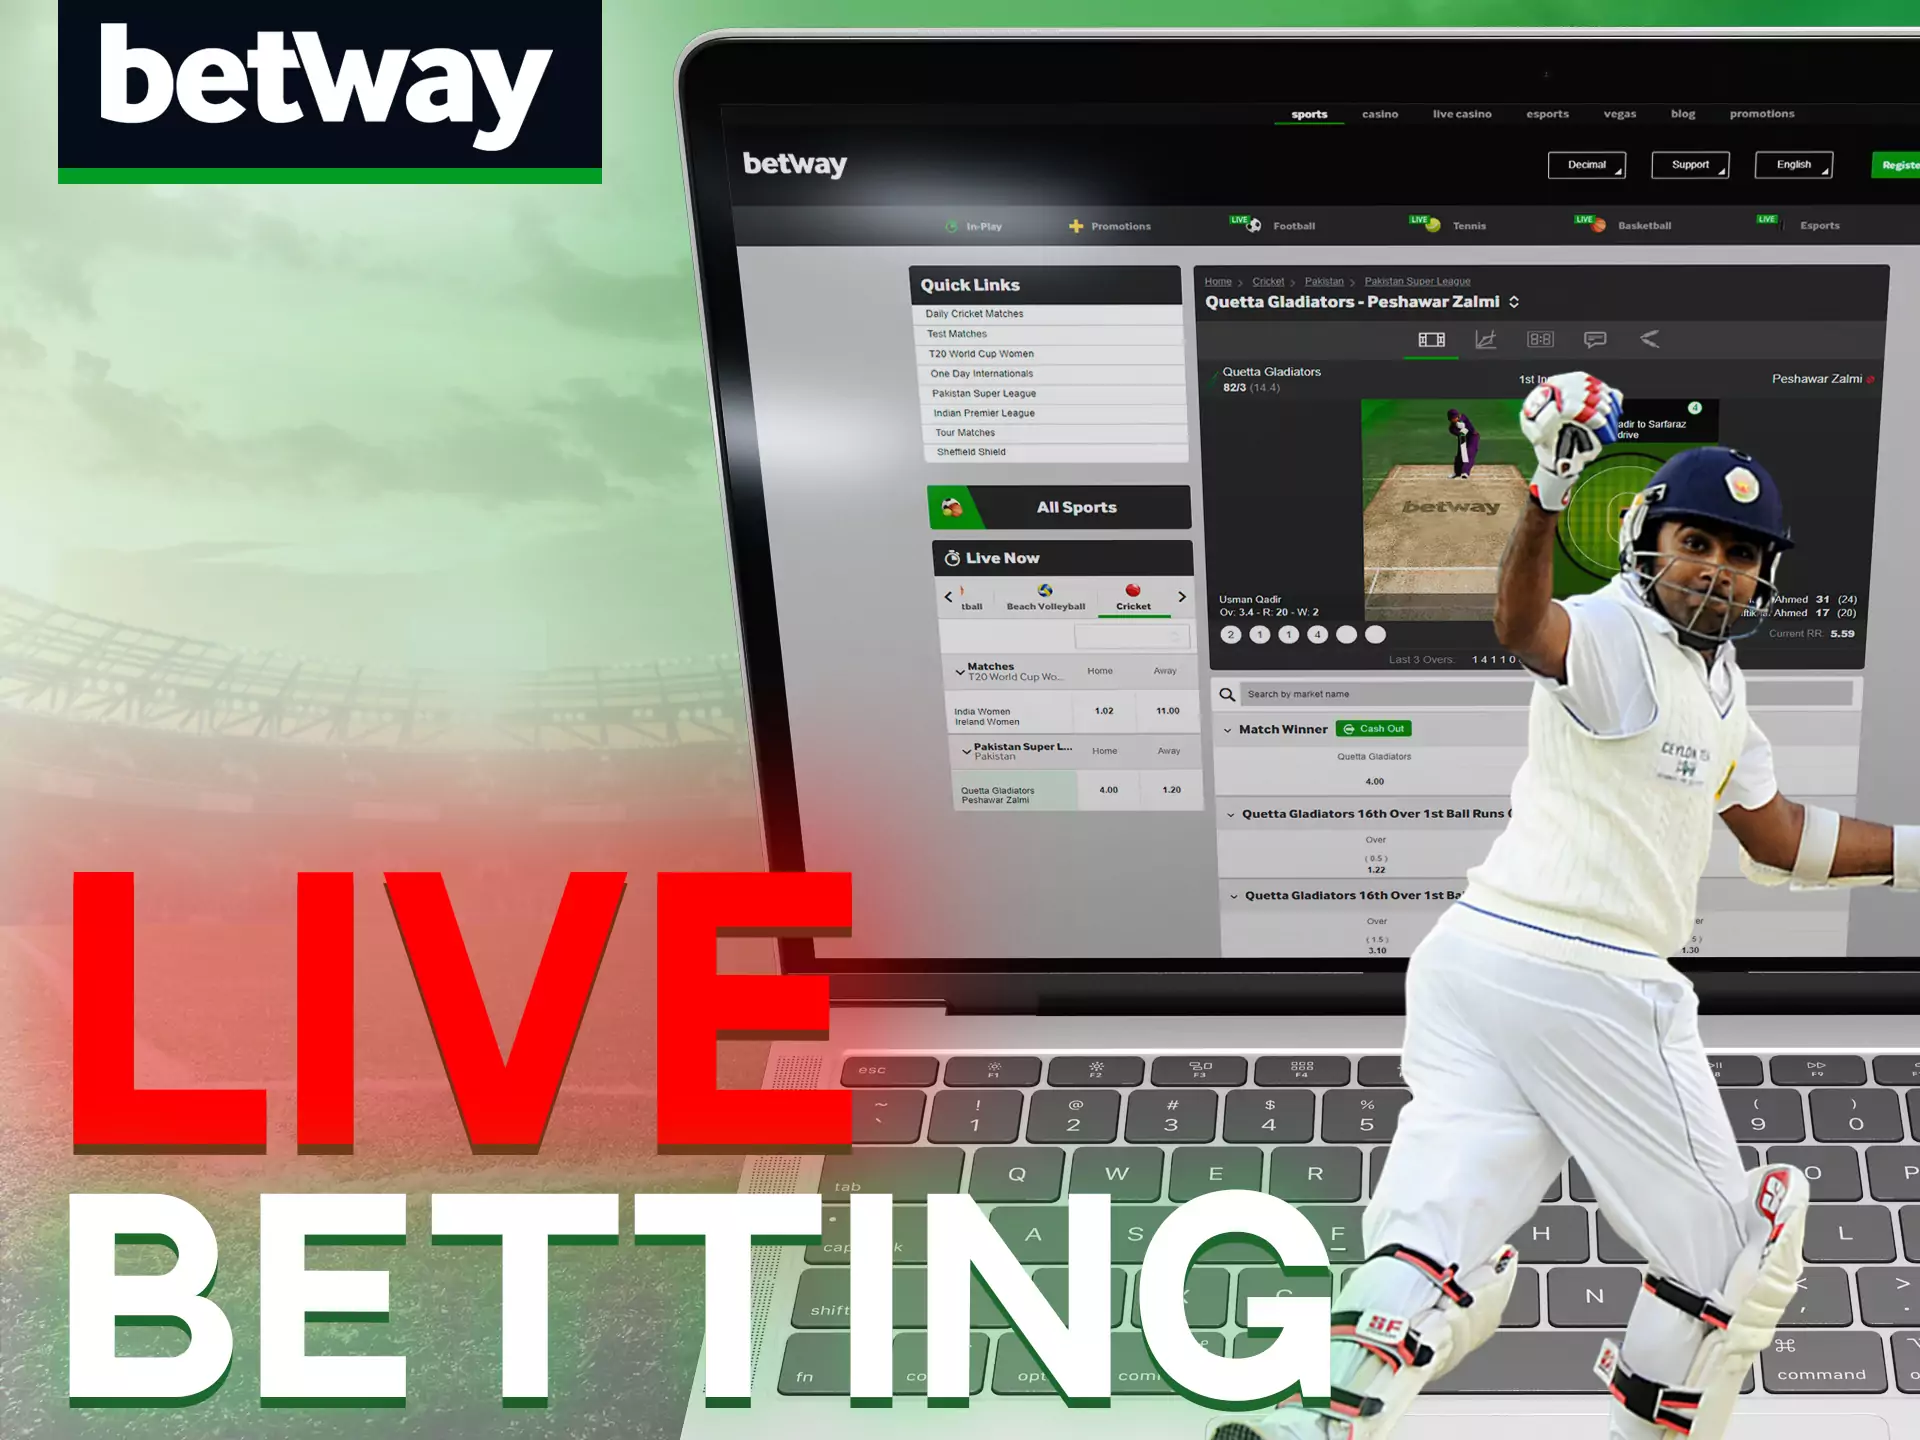 Watch matches and bet in live format at Betway.